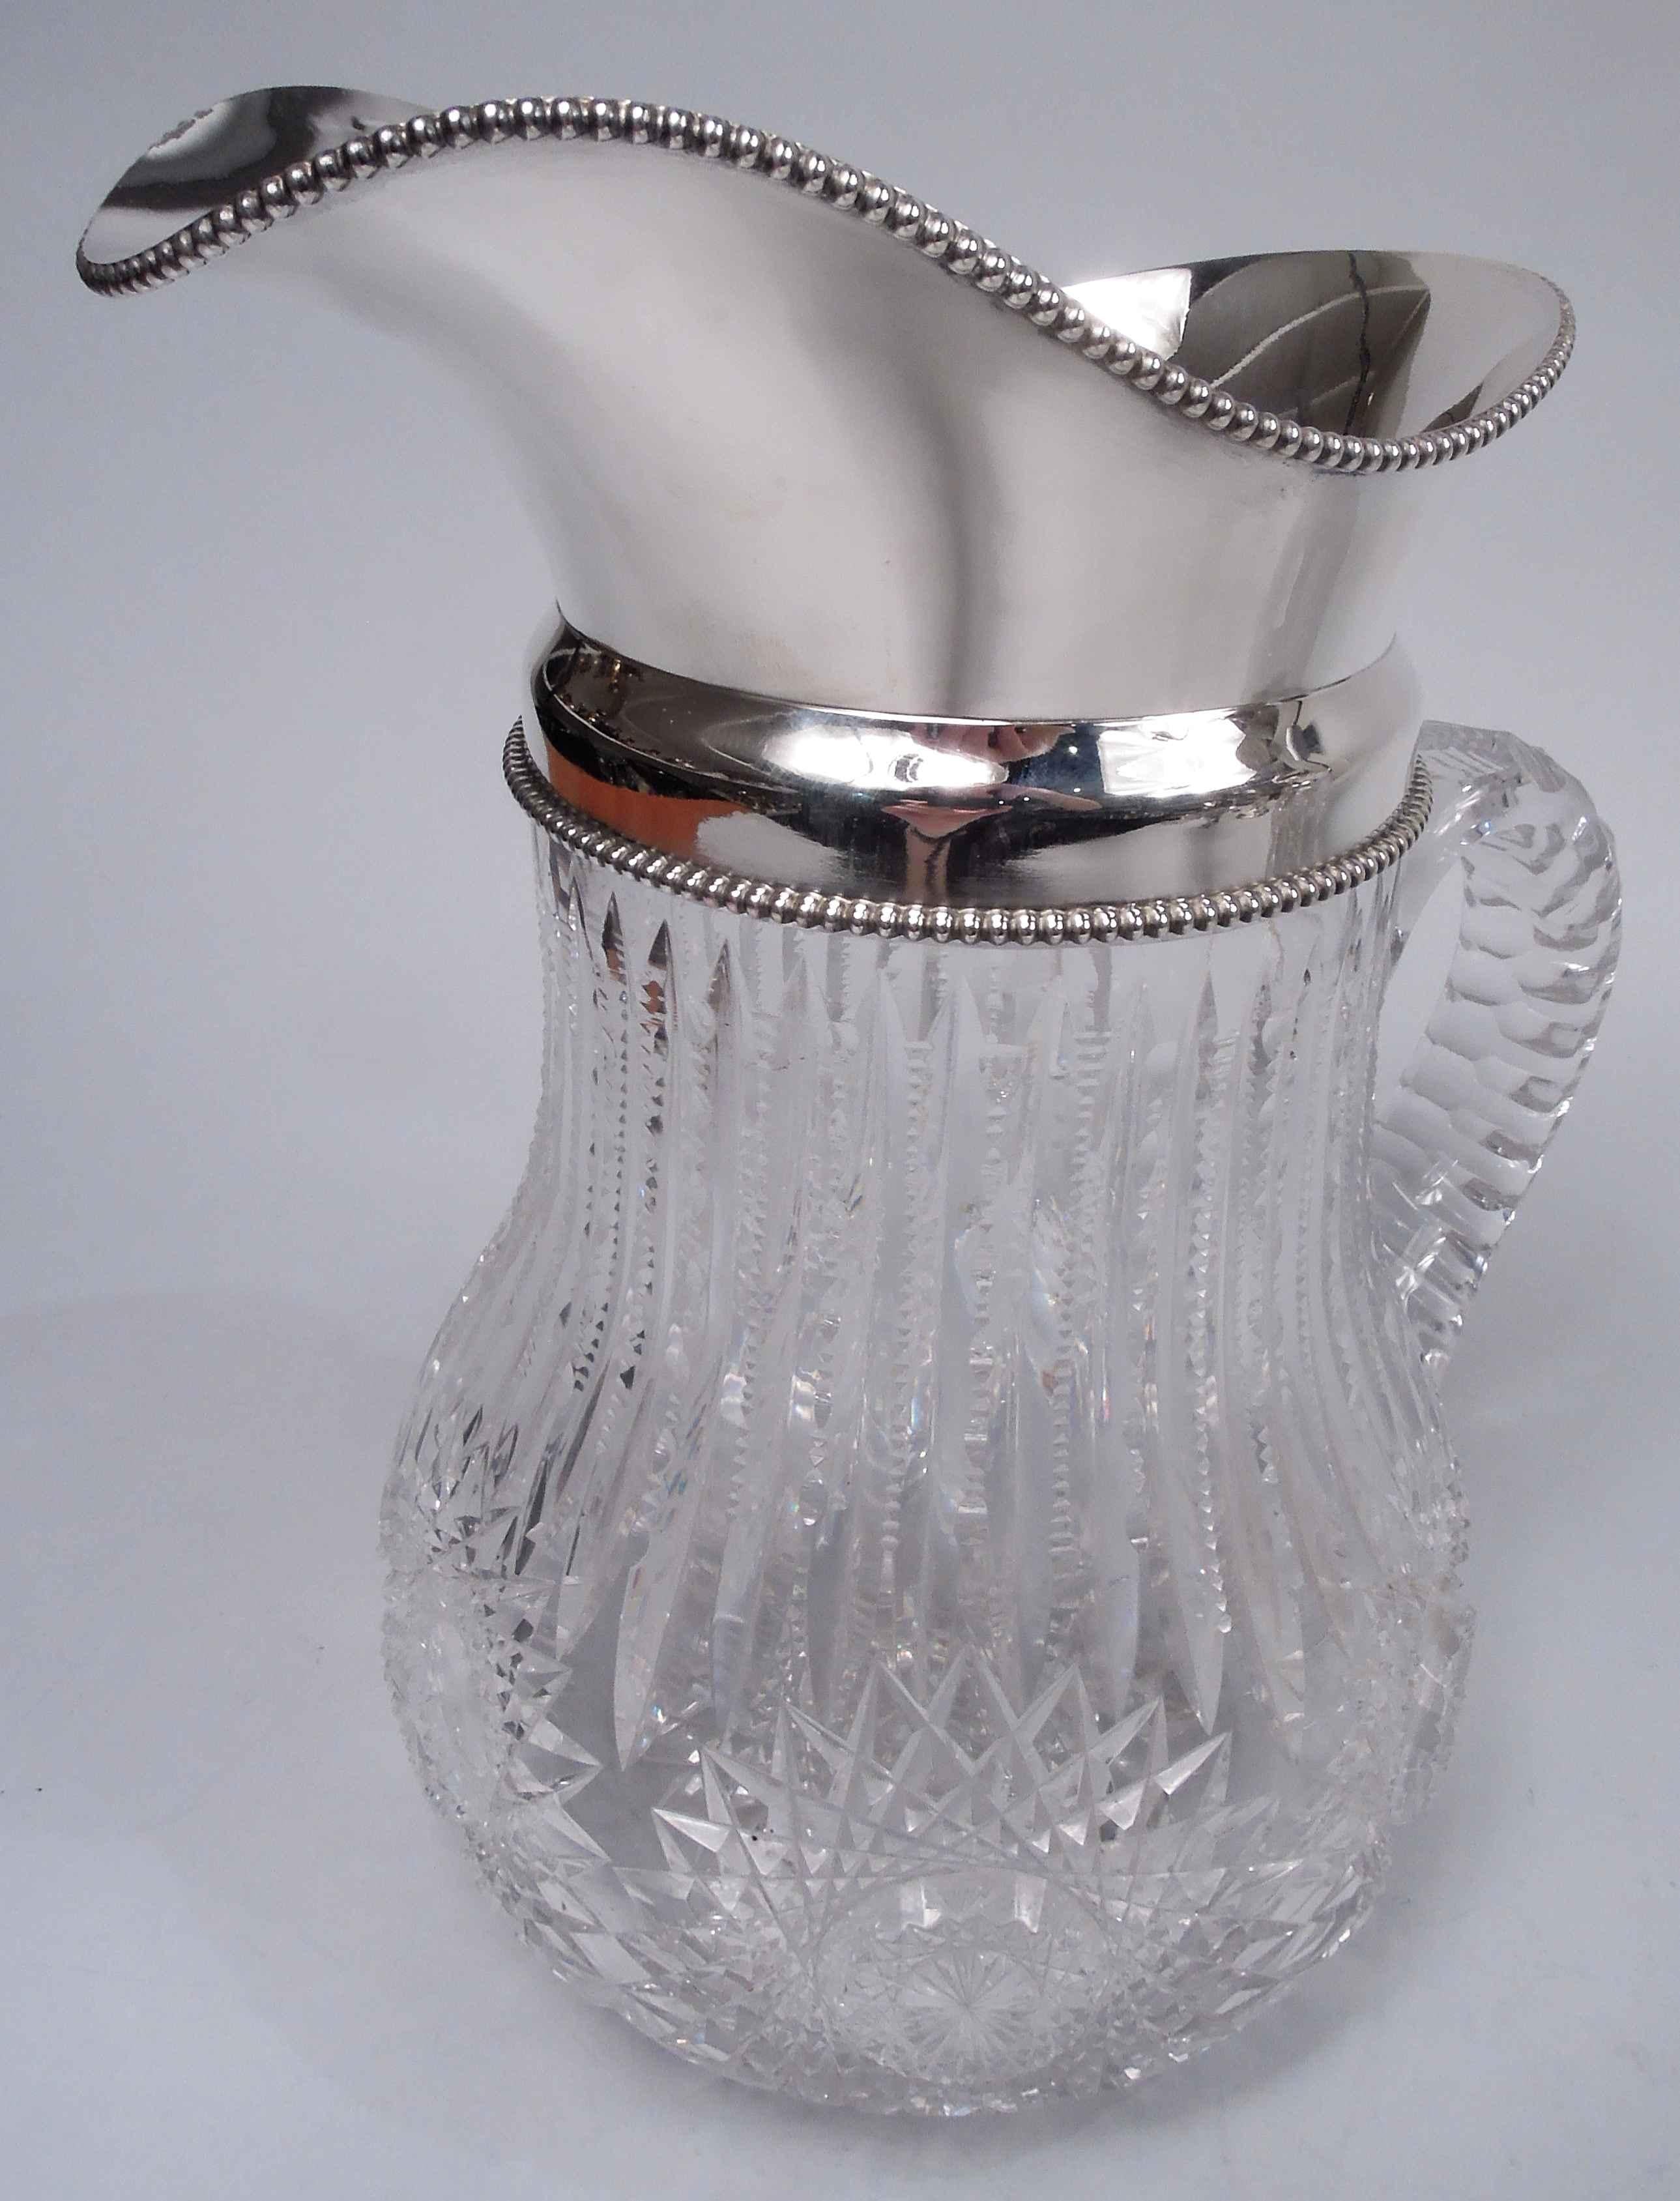 Edwardian Classical brilliant-cut glass water pitcher with sterling silver collar. Made by Wilcox (part of International) in Meriden, Conn., ca 1910. Baluster with c-scroll handle; ornament in form of leaf flutes, ferns, and stars. Beaded collar